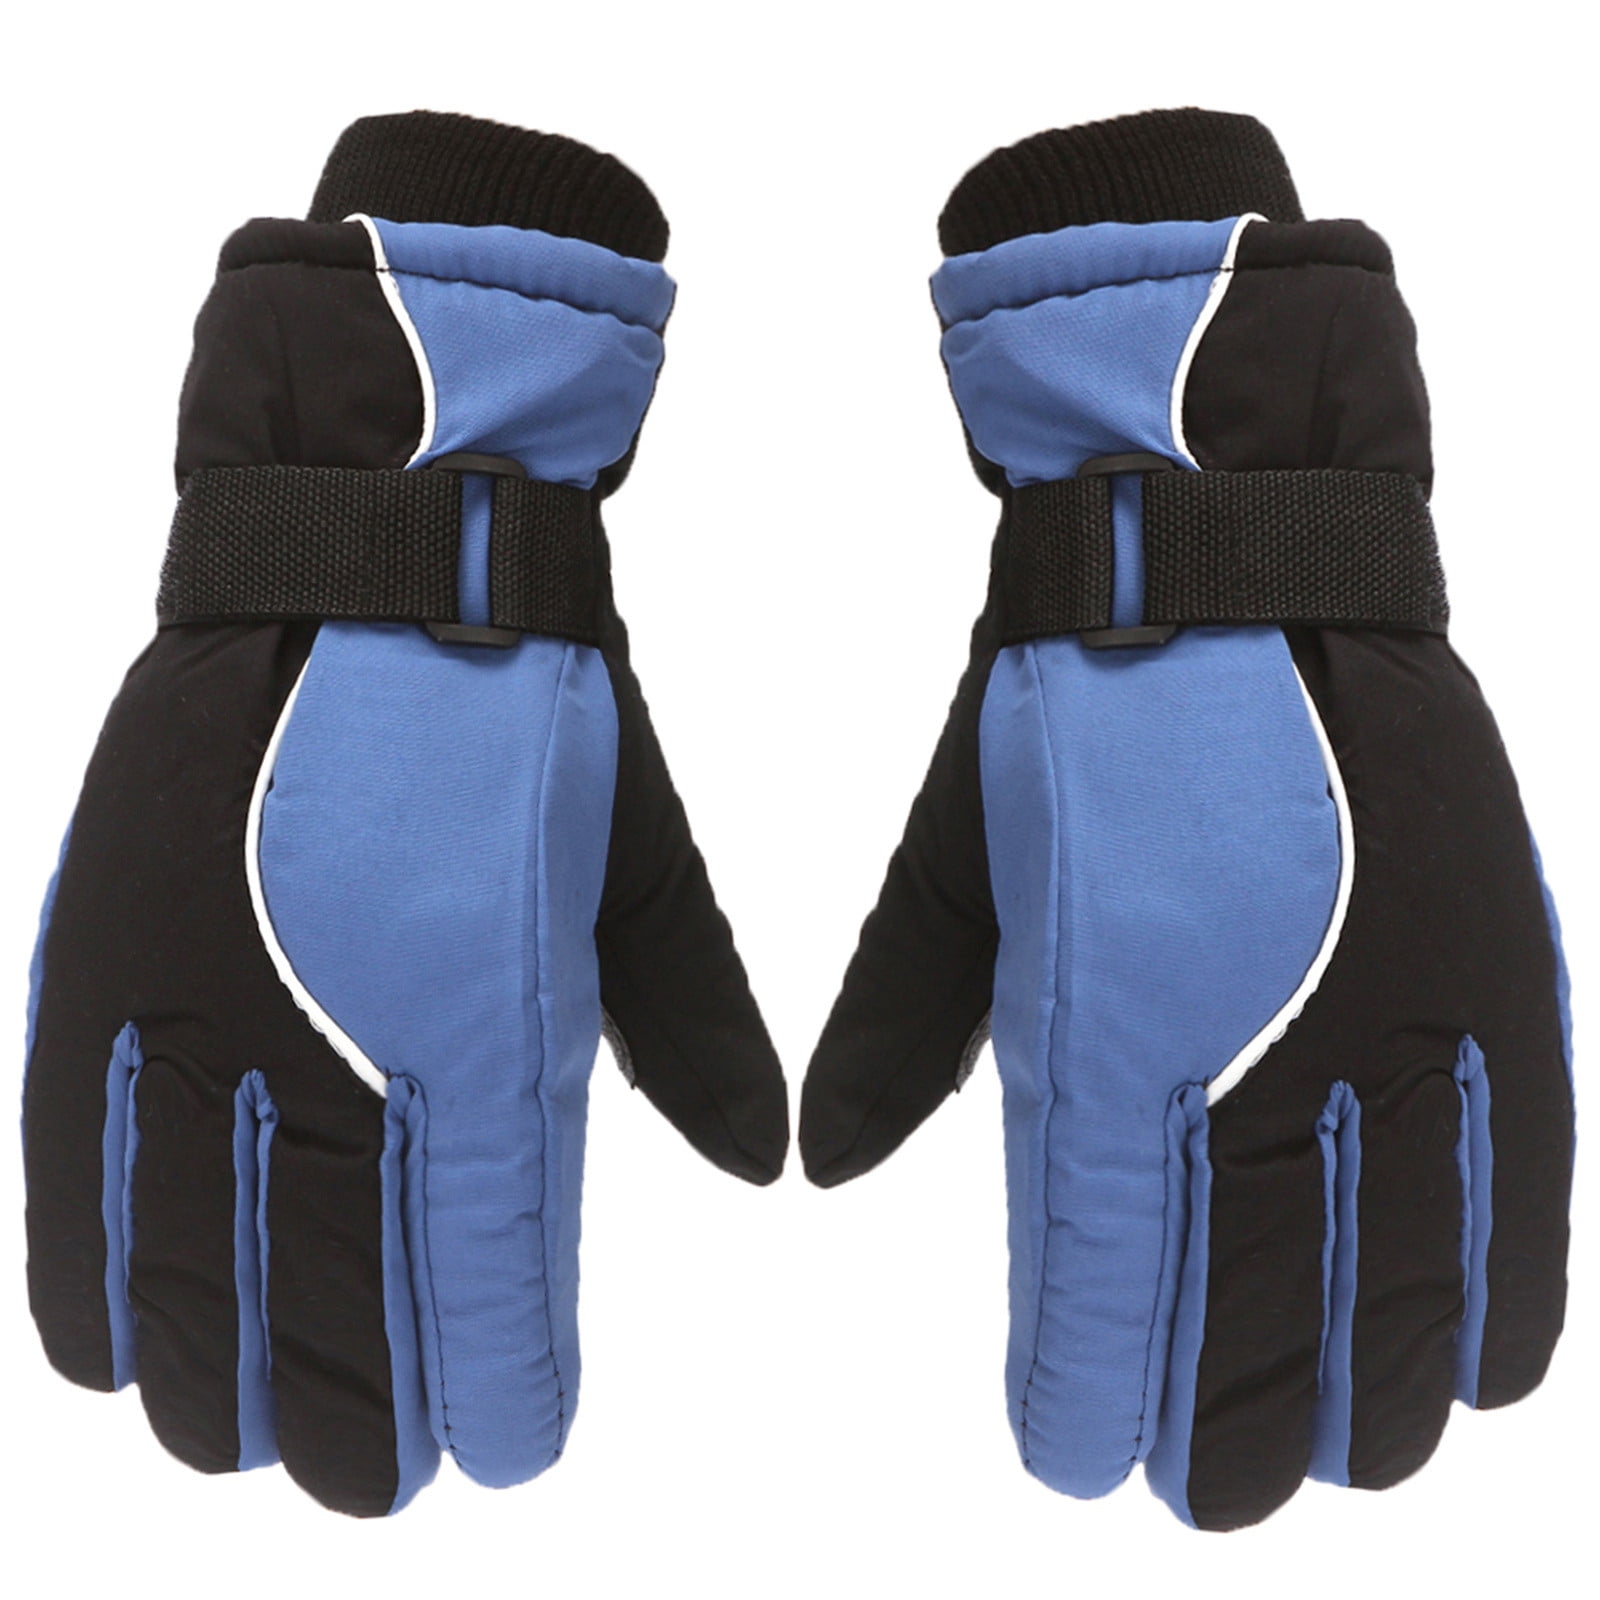 Details about   Kids Winter Warm Snowboarding Ski Gloves Waterproof Cycling Skiing Mittens 